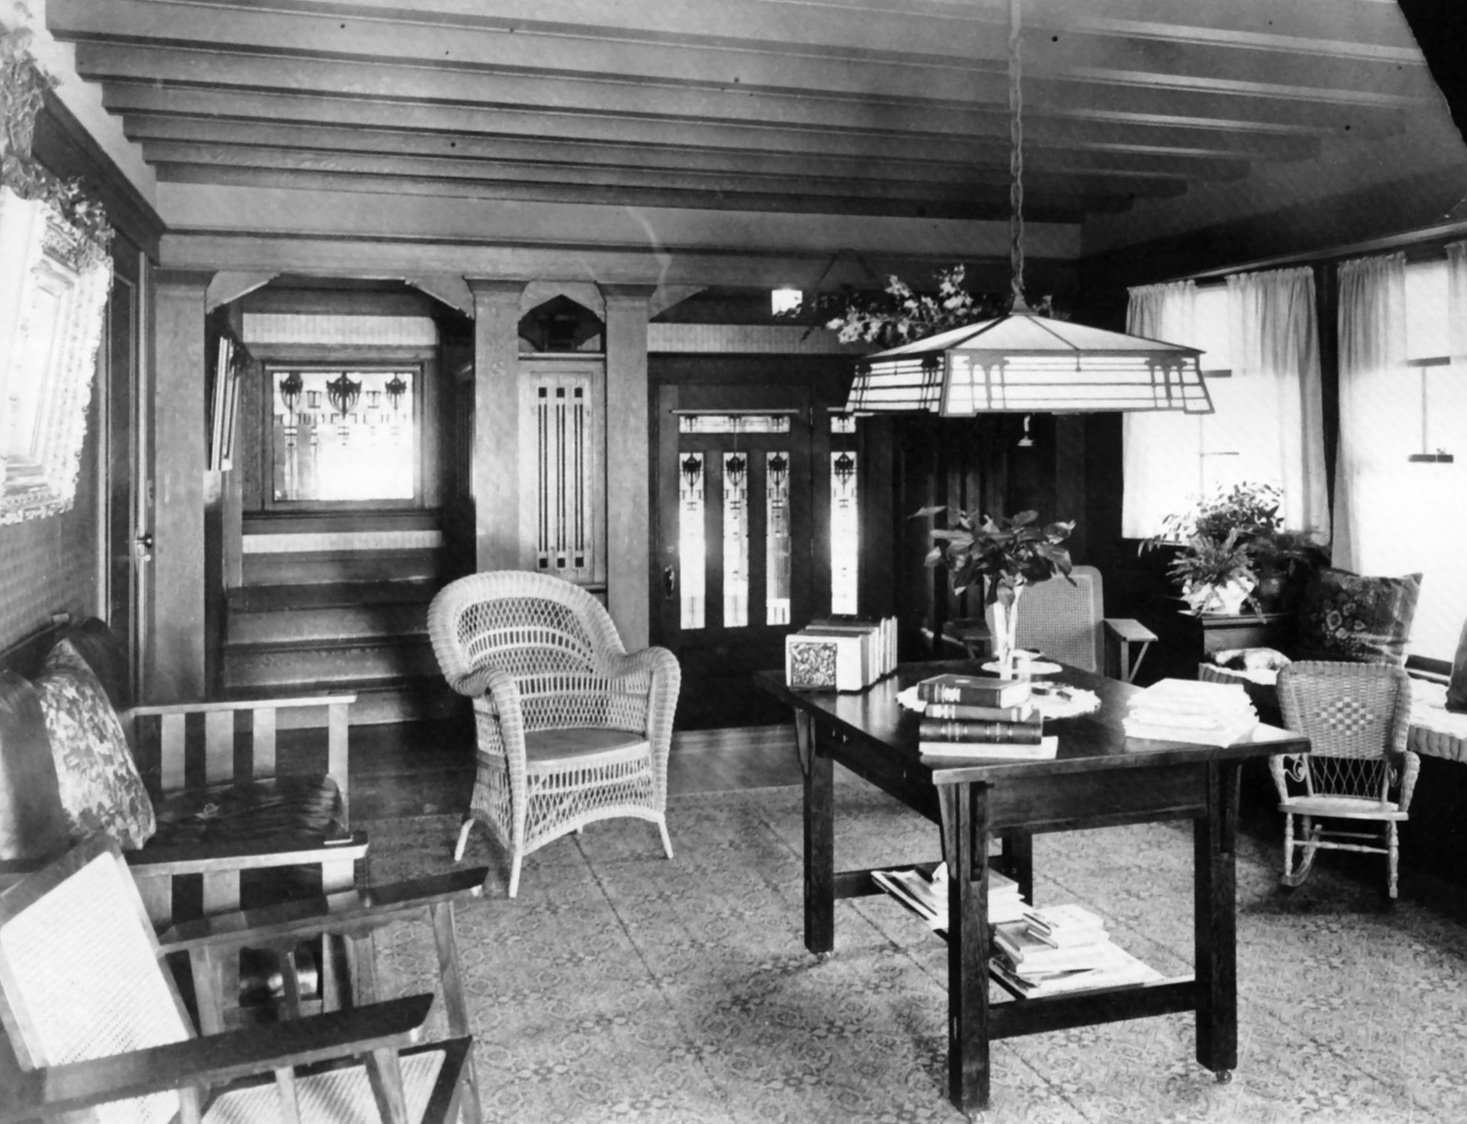  The arts &amp; crafts style living room Ellis Lawrence designed for his own family’s half of the house.  